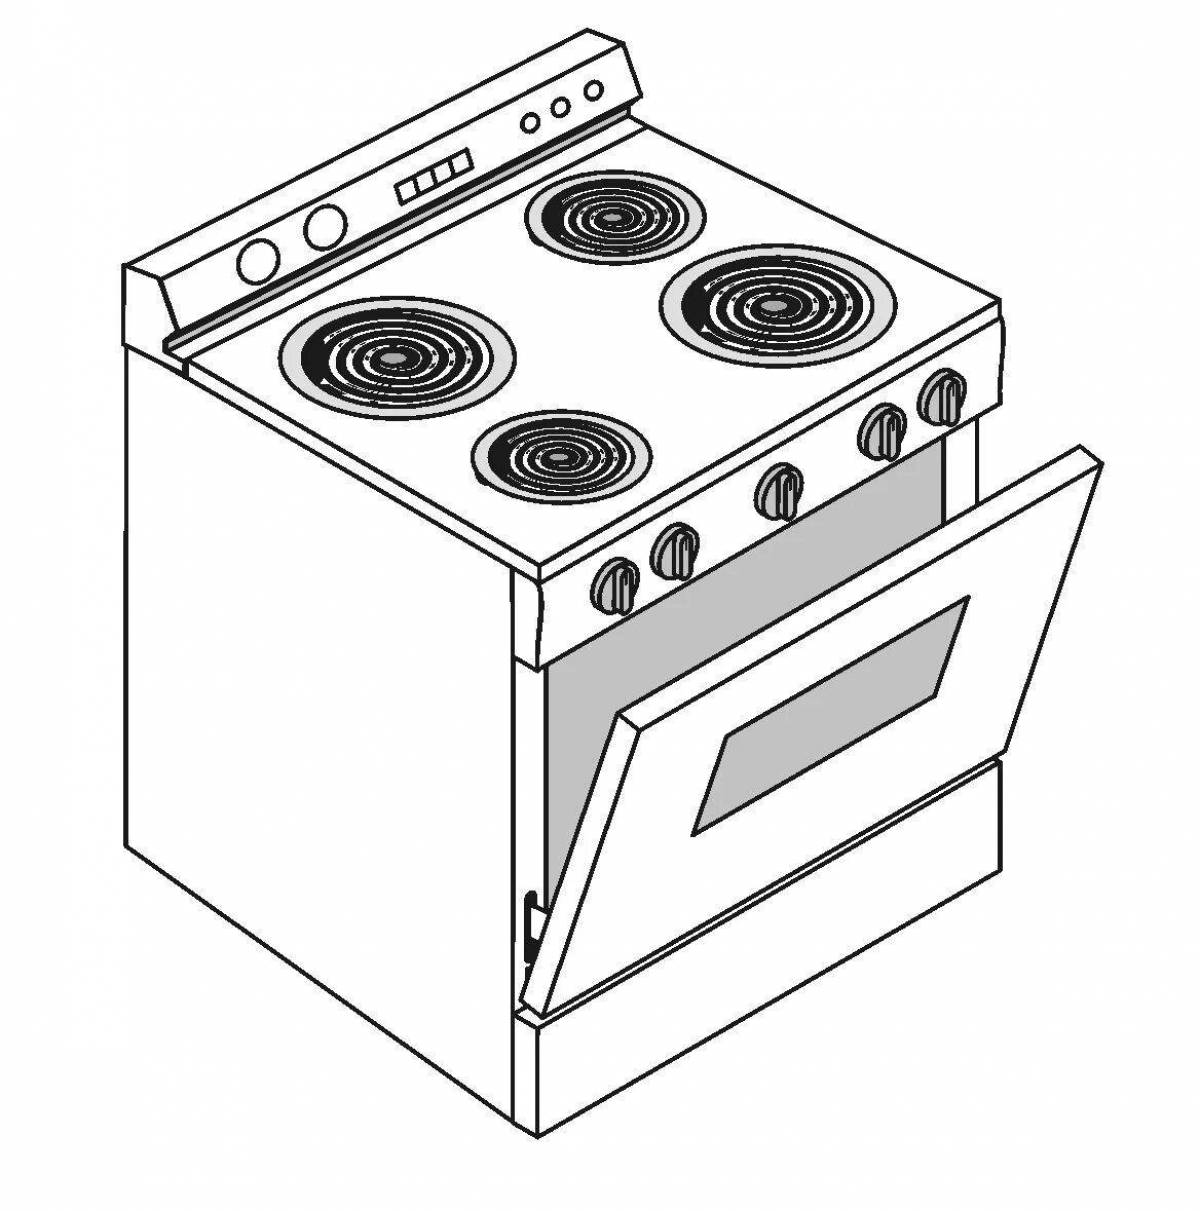 Coloring book glowing oven